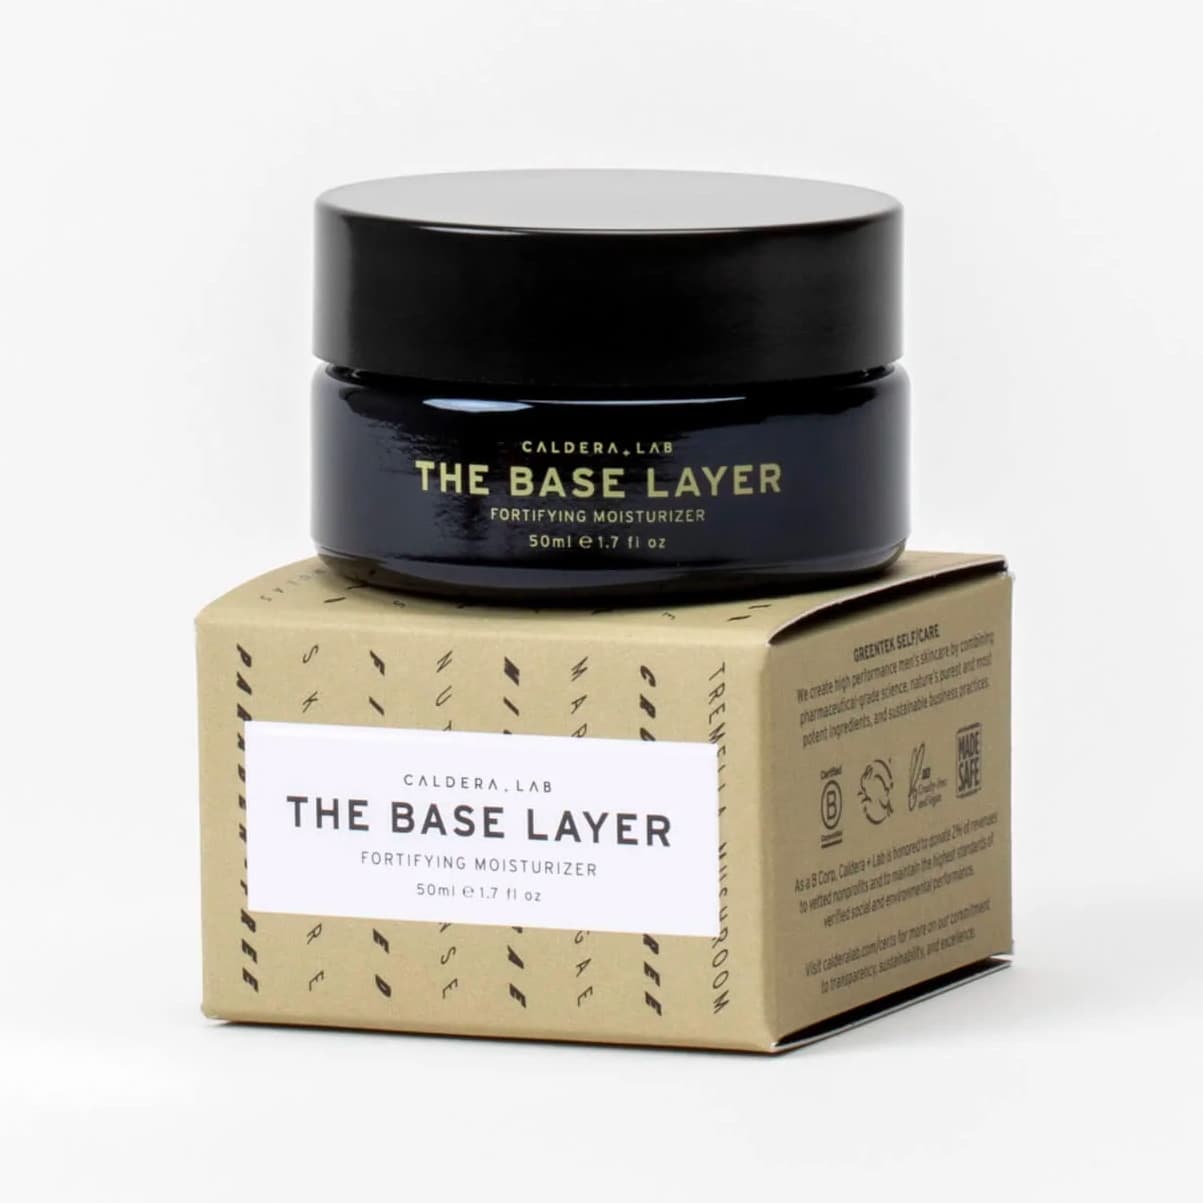 The Base Layer fortifying moisturizer with the glass jar sitting atop the outer beige packaging on a white background.